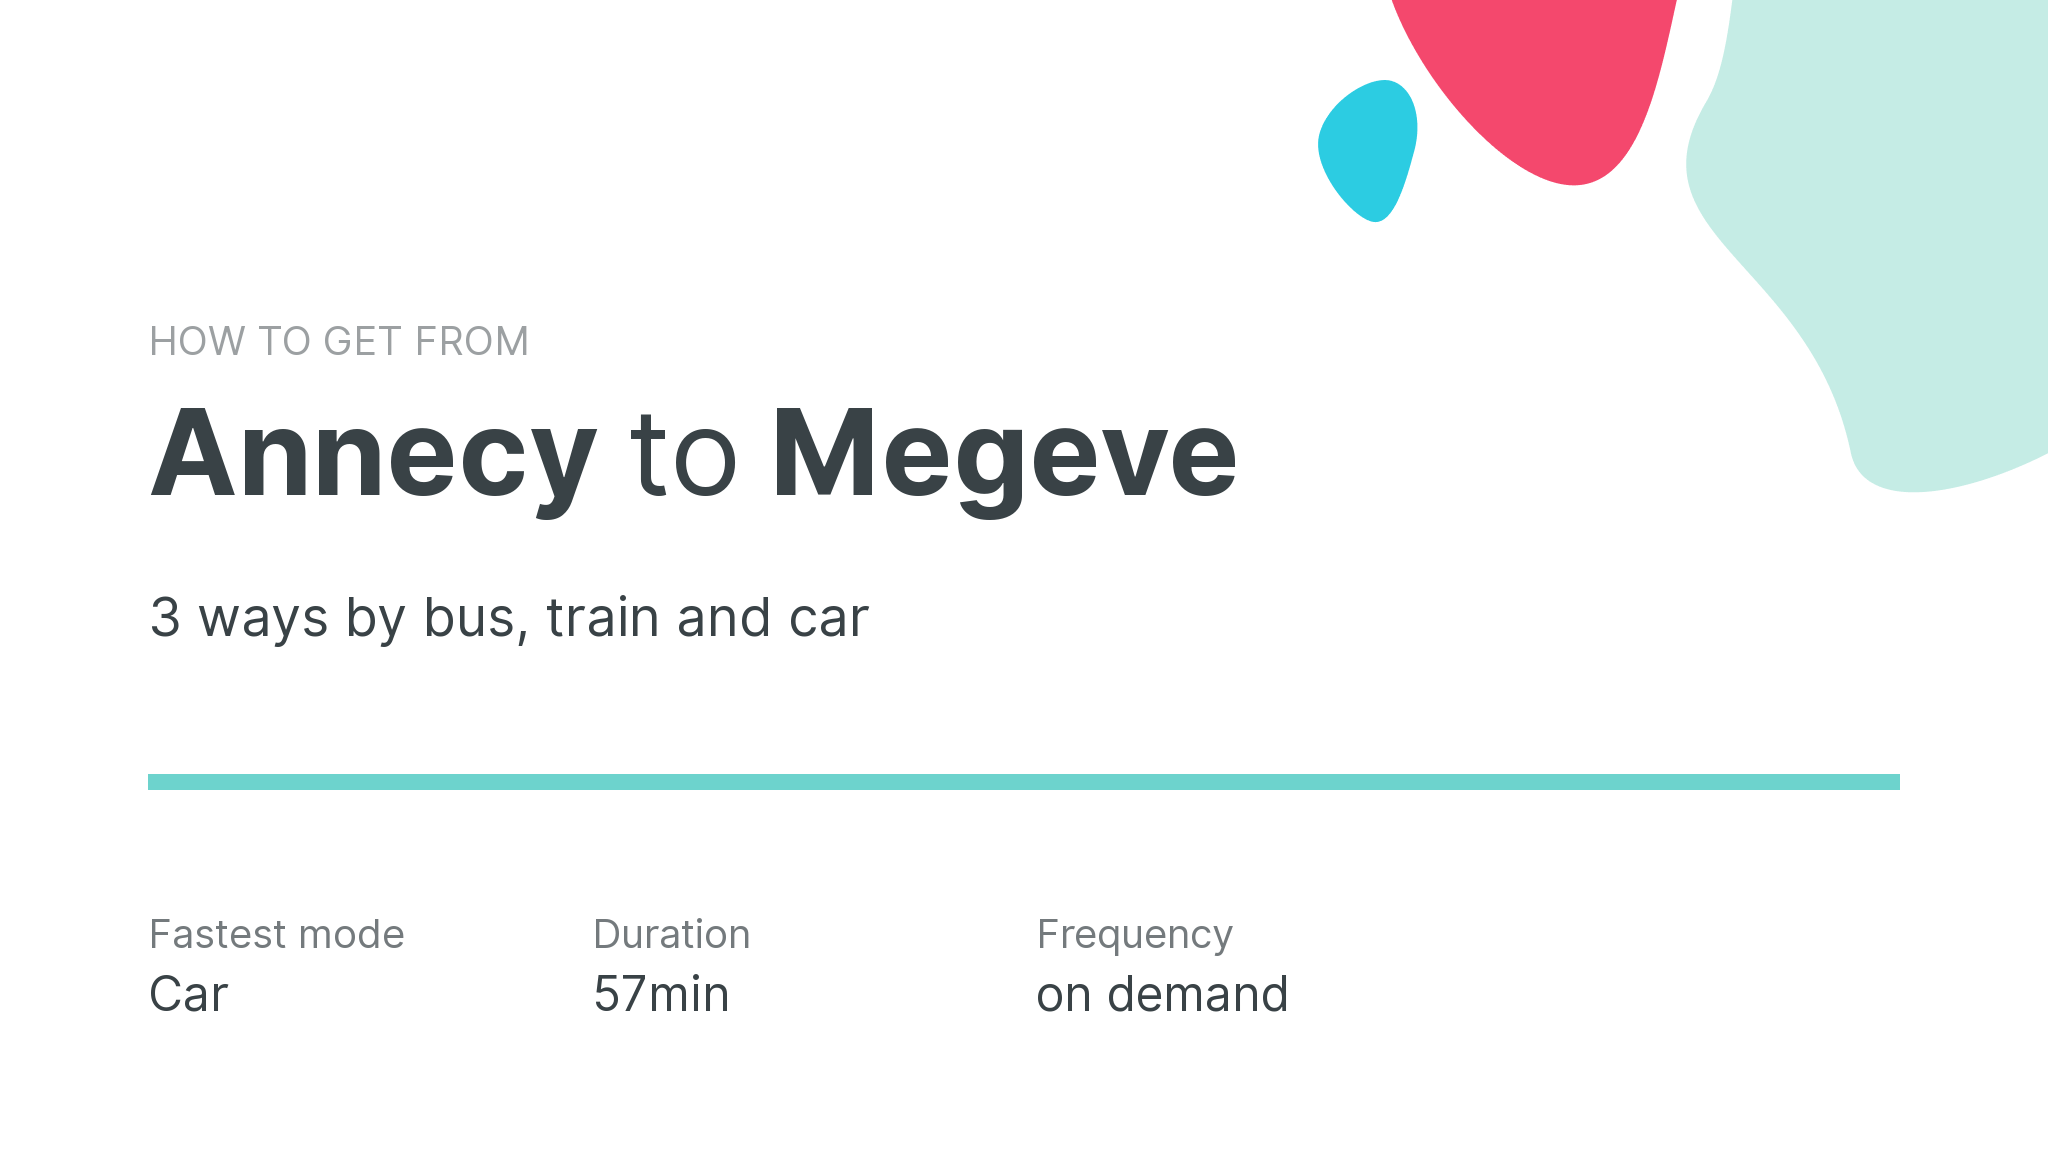 How do I get from Annecy to Megeve